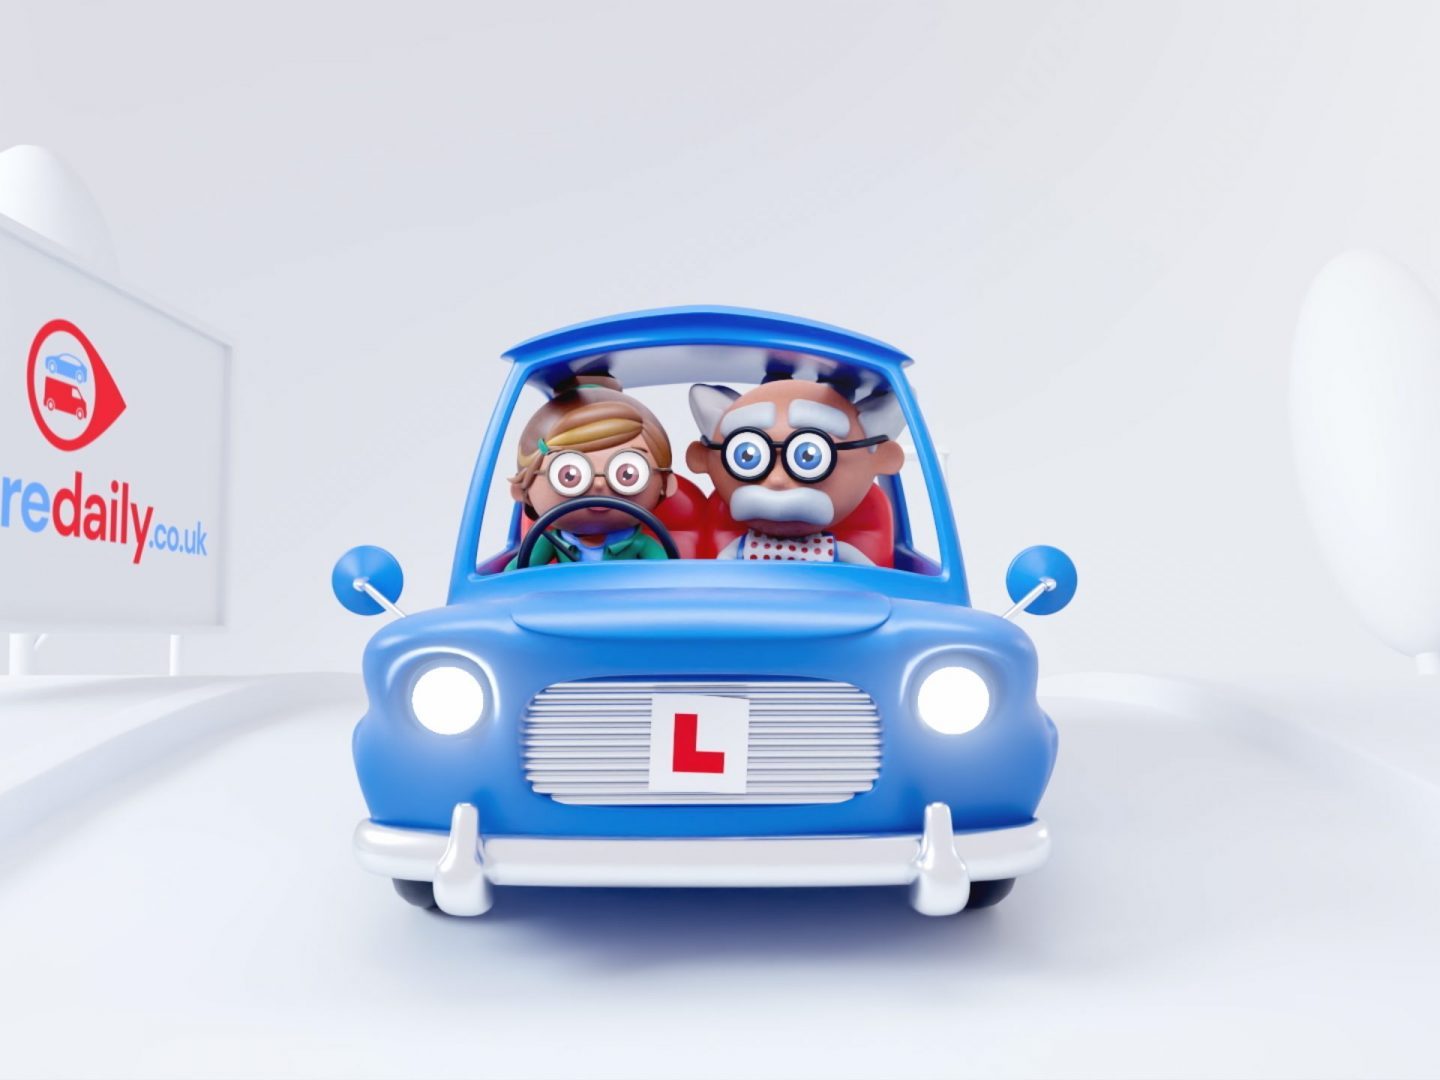 Still from Insure Daily advert featuring the Prof and the Learner Driver character in the car.